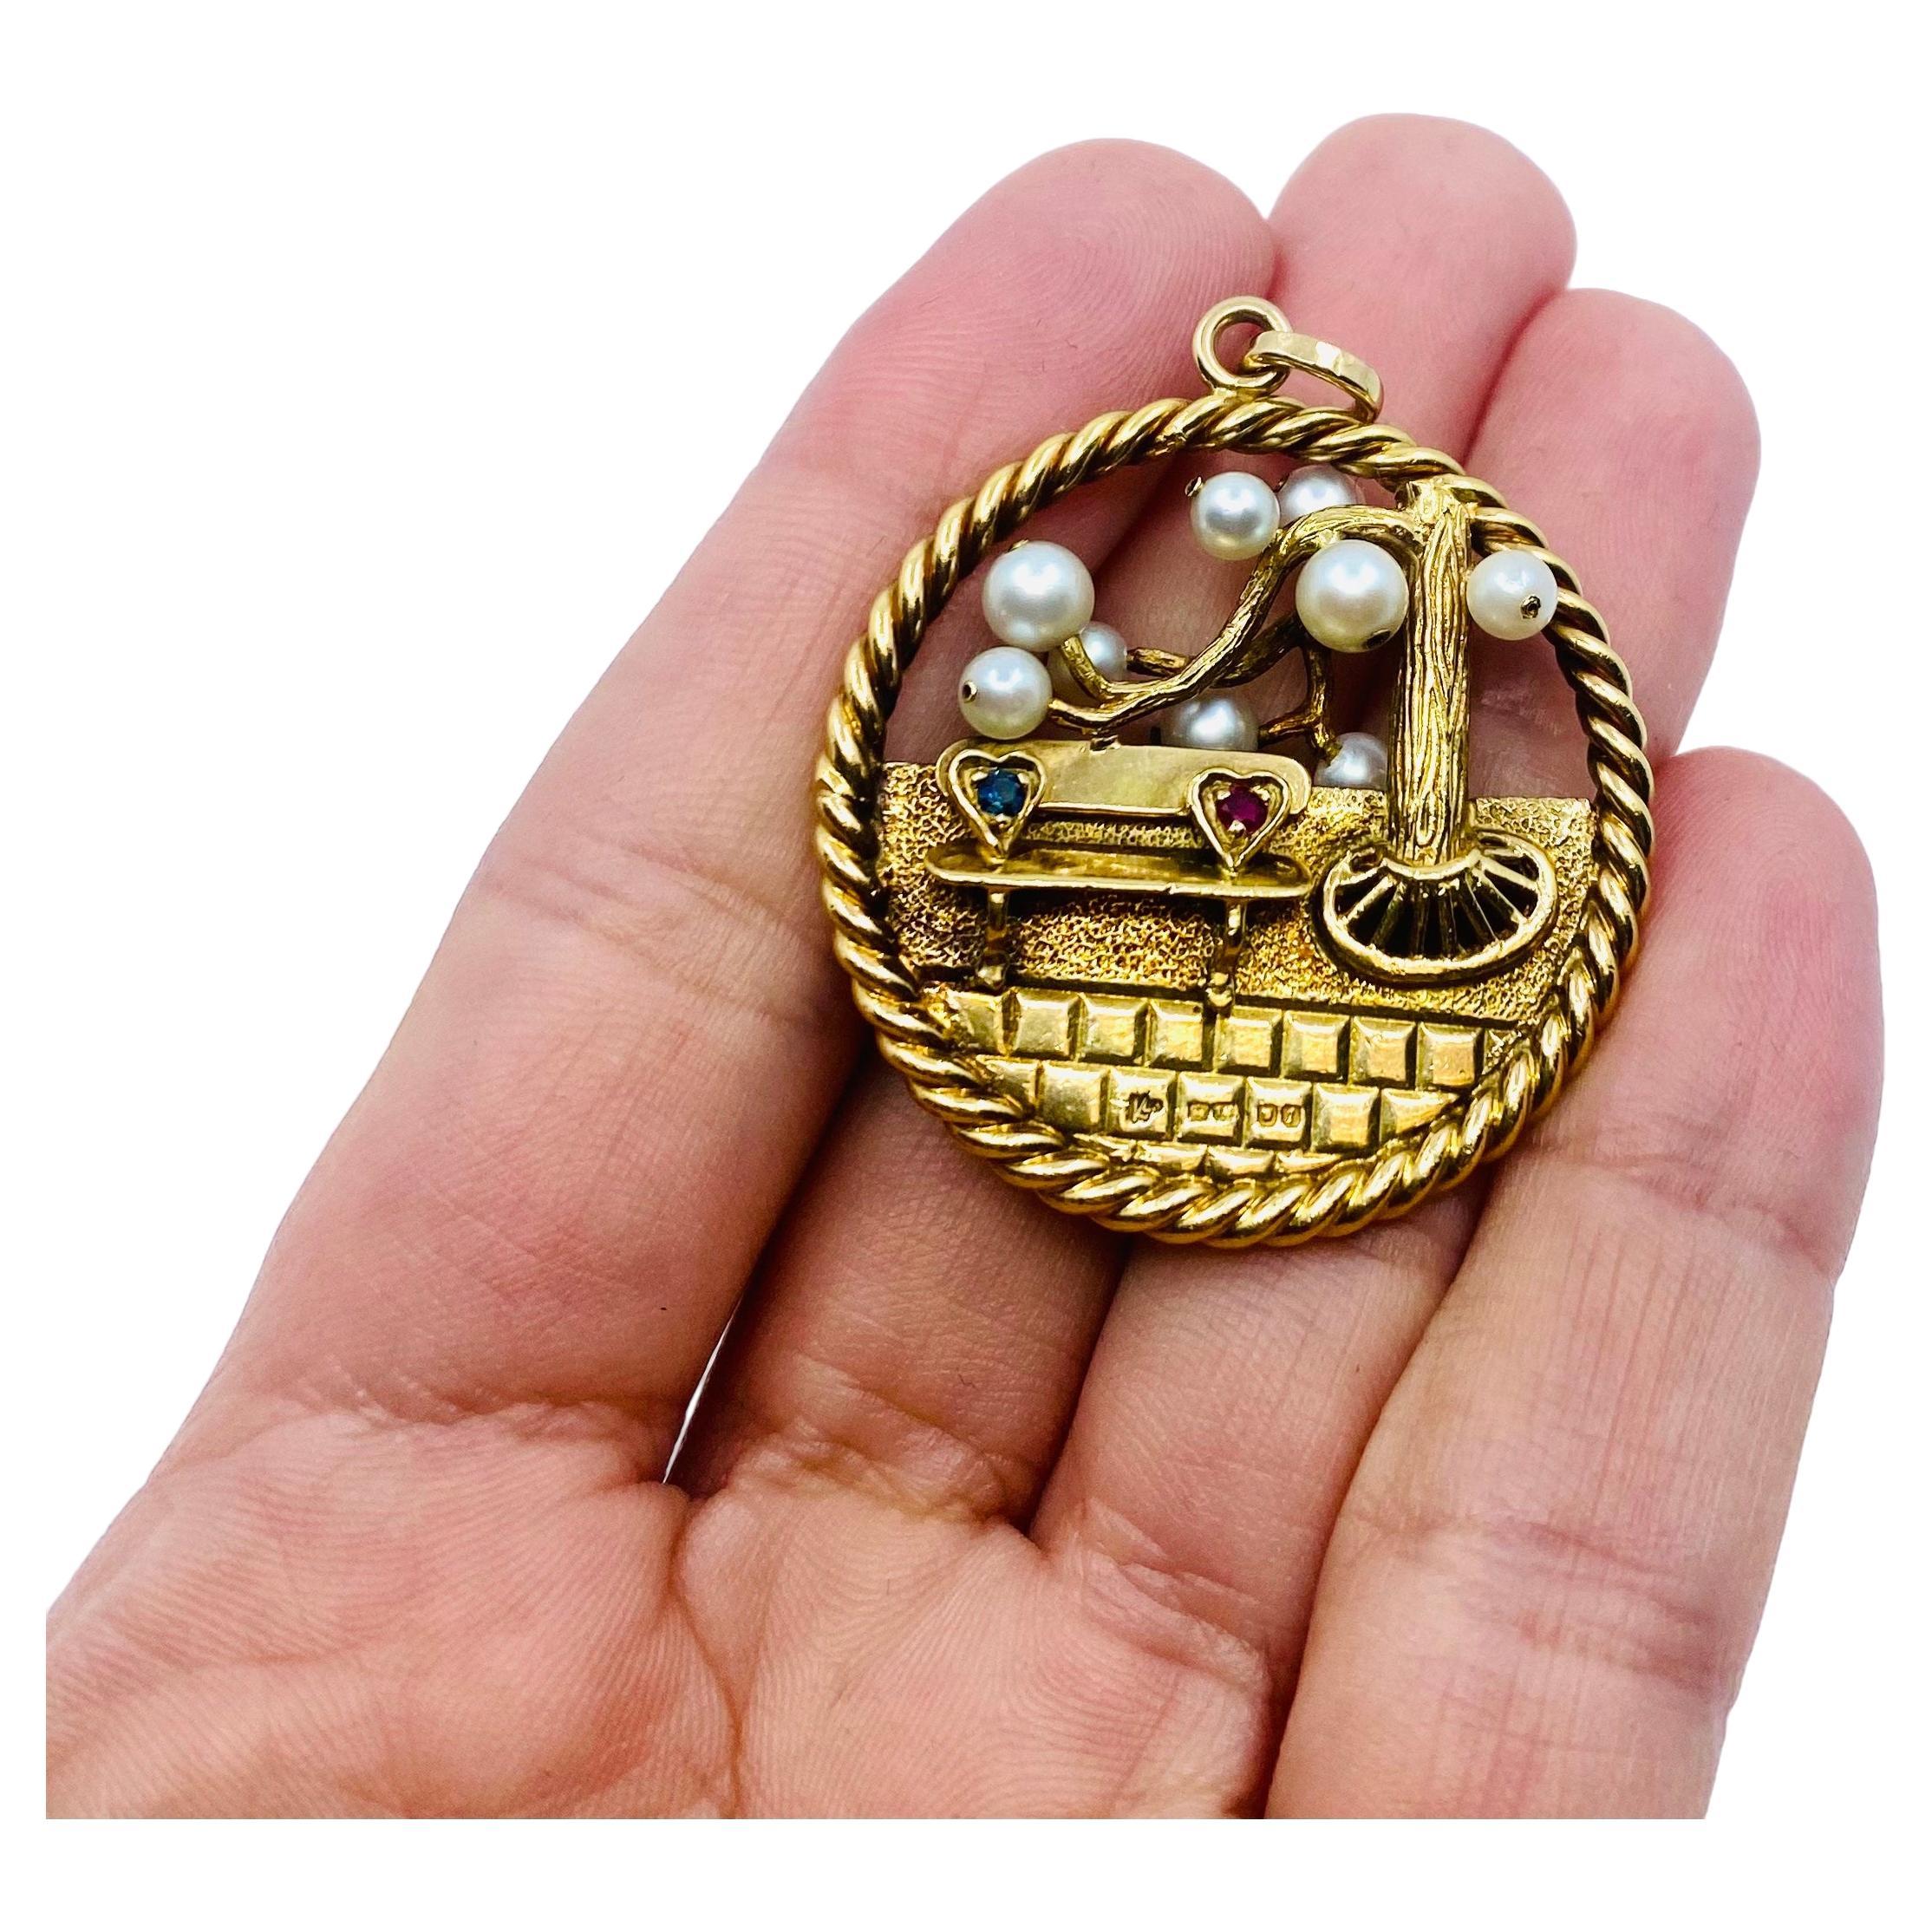 A fun Kutchinsky pendant, made of 18k gold, features sapphires, rubies, and pearls.
The circular pendant is divided in two sections: the top is open work, and the bottom is solid.
The design depicts a stylized tree with the branches decorated with